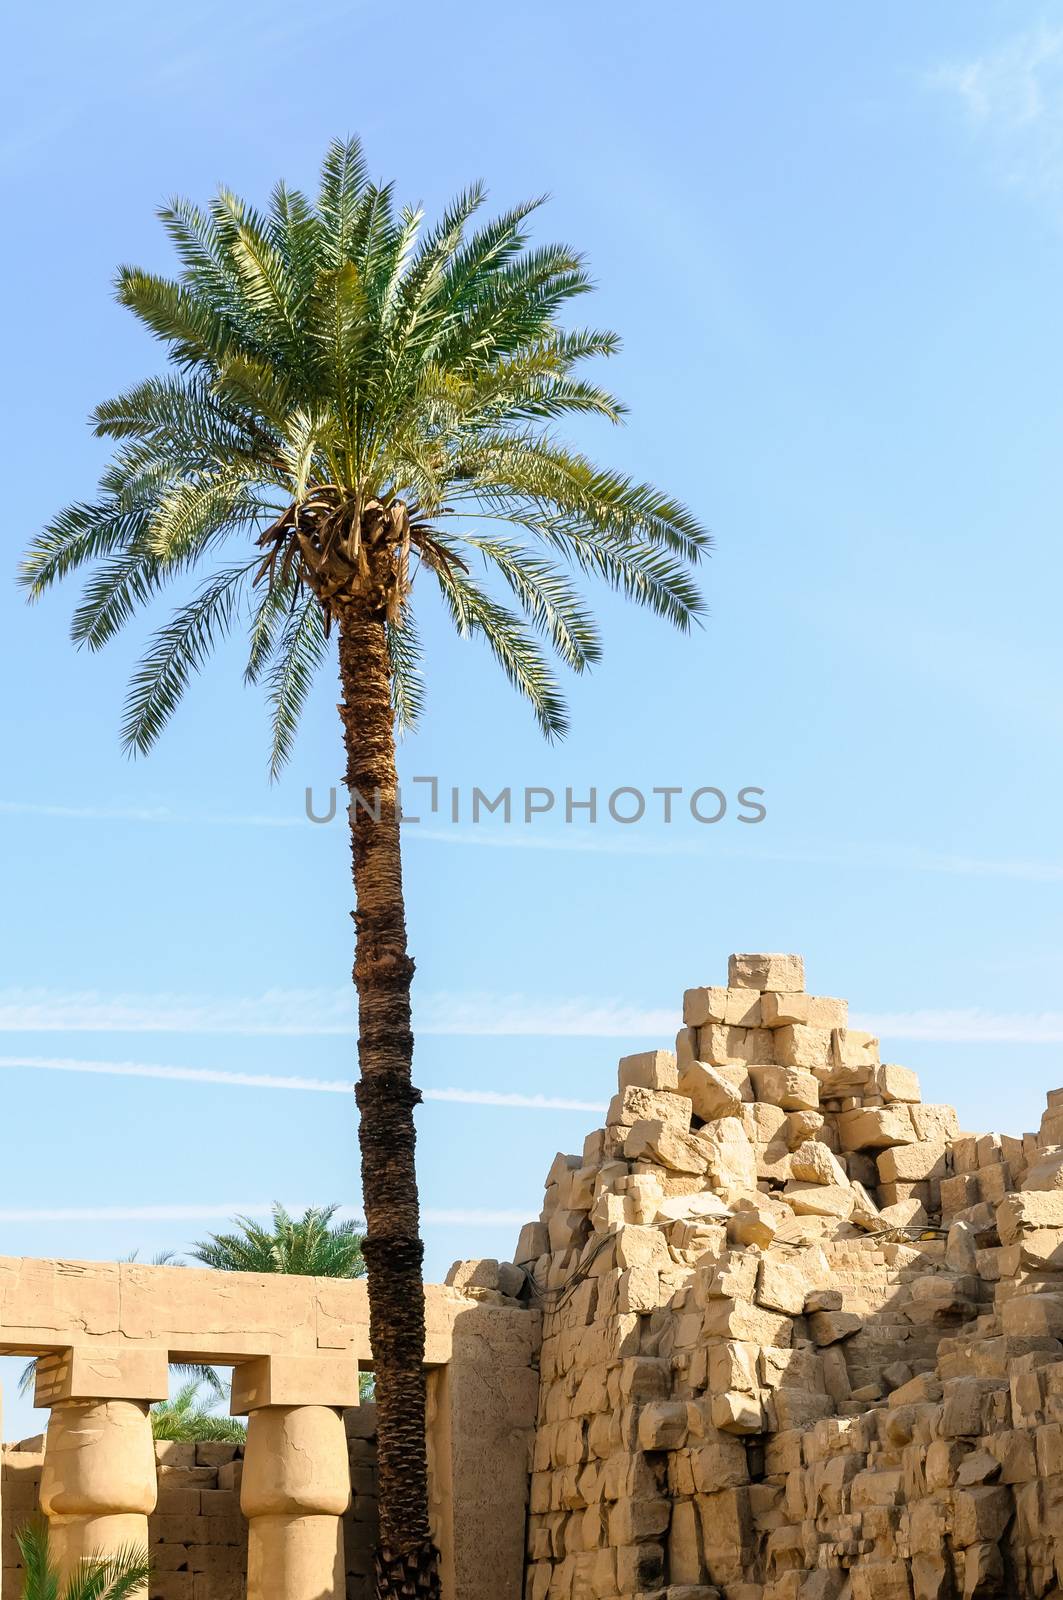 Palm and ruins in the Karnak temple in Luxor, Egypt by MaxalTamor